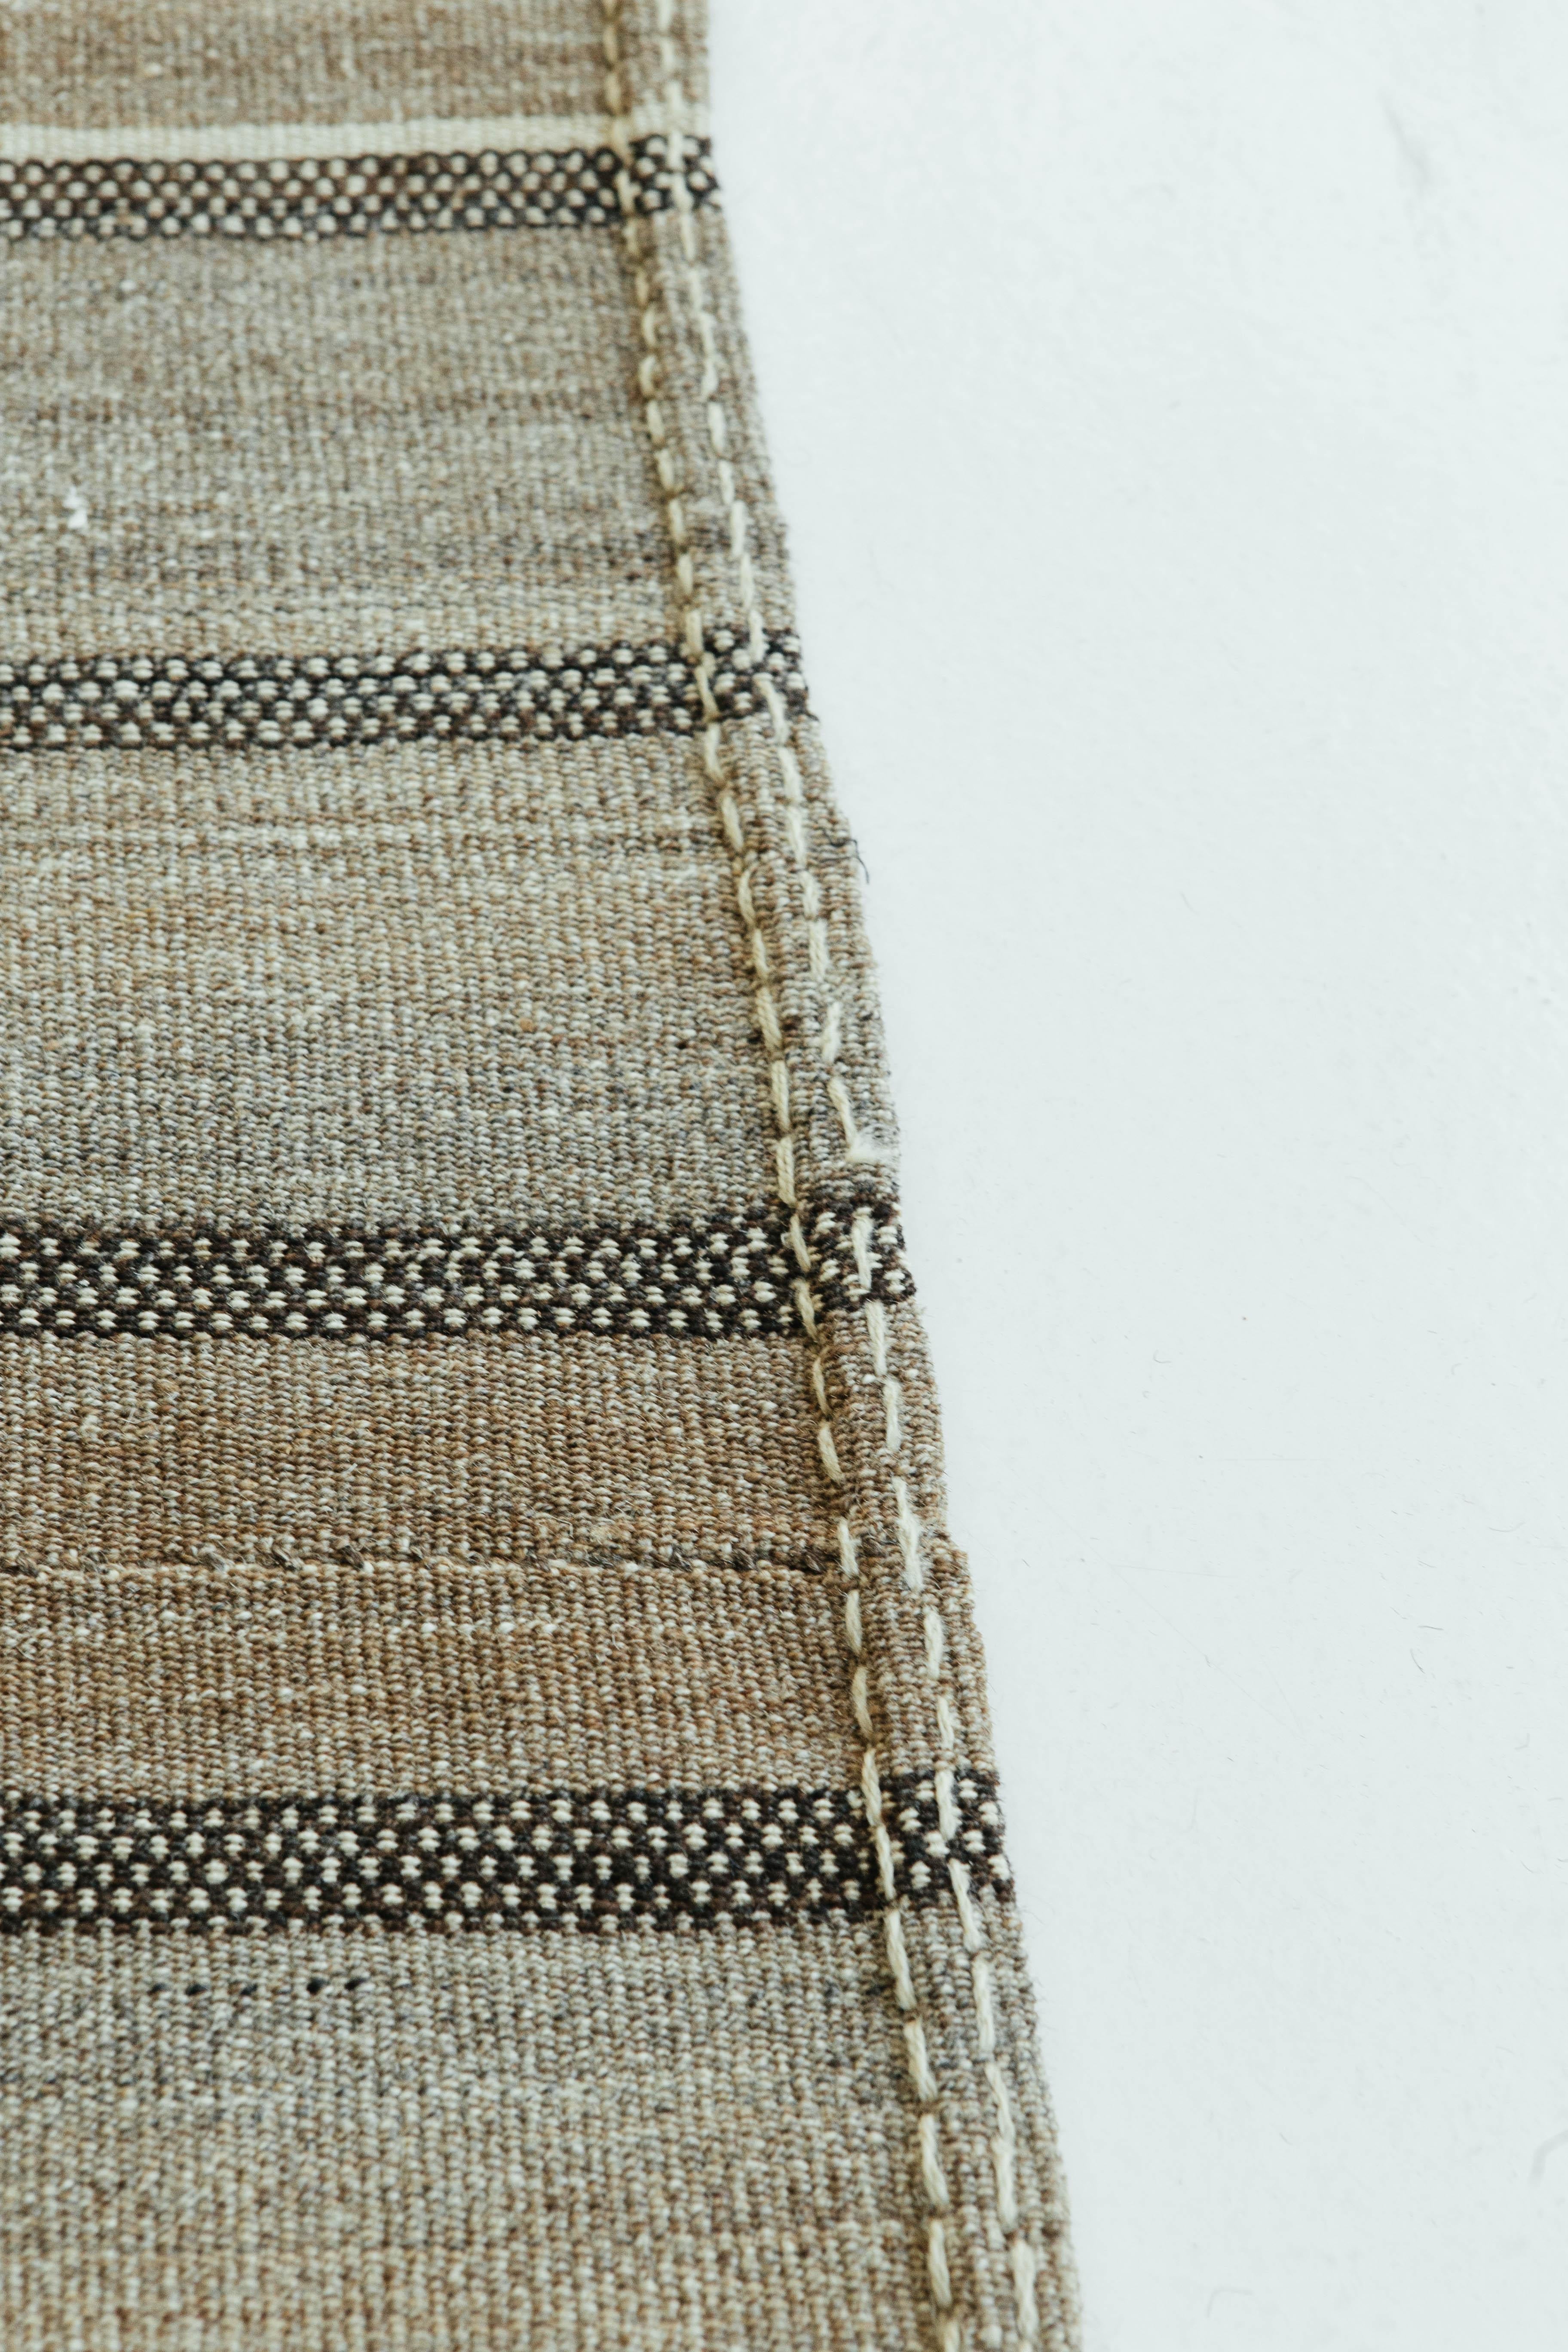 A gorgeous vintage Anatolian Turkish flat-weave banded in natural ivory, peachy tan, and brown stripes. The varying degrees of stripes create a simple yet interesting design for a wide variety of interiors. Vintage Turkish Anatolian rugs weave